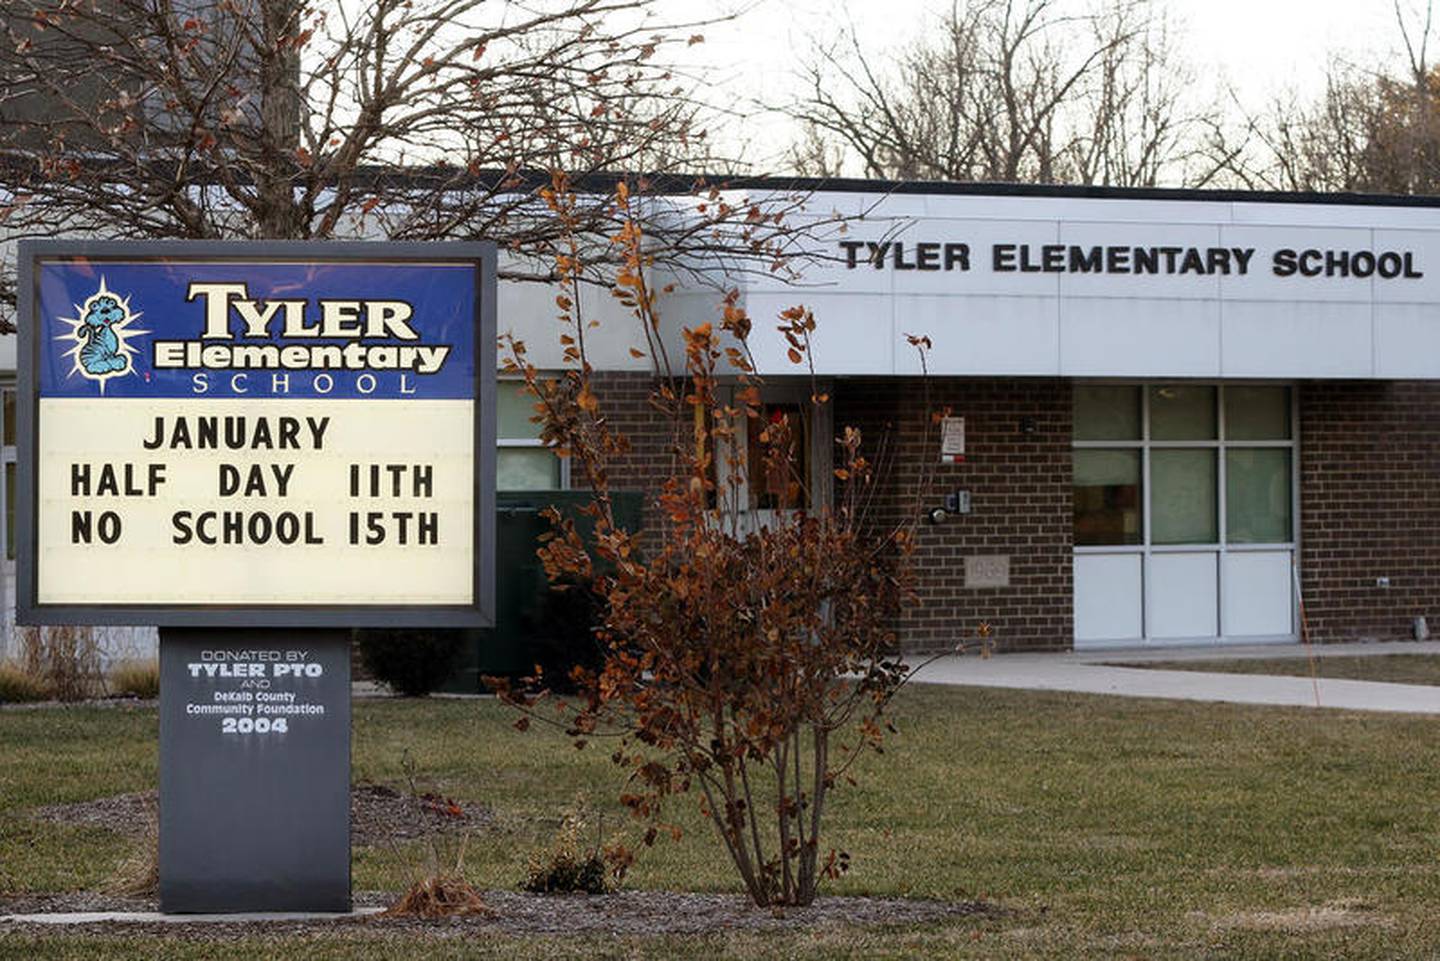 Tammy Carson, director of facility operations with D-428, wrote in a letter sent to parents Friday that samples from sinks in eight classrooms at Tyler Elementary School had lead levels greater than 5 parts per billion. Some of them were nearly 10 times the district’s action level of 15 parts per billion, at which repairs are considered necessary.

Lead is a poison that affects virtually every system in the body, according to the Centers for Disease Control. It is particularly harmful to the developing brains and nervous systems of young children. Children’s exposure to lead has been linked to developmental delays, as well as violent behavior later in their lives.